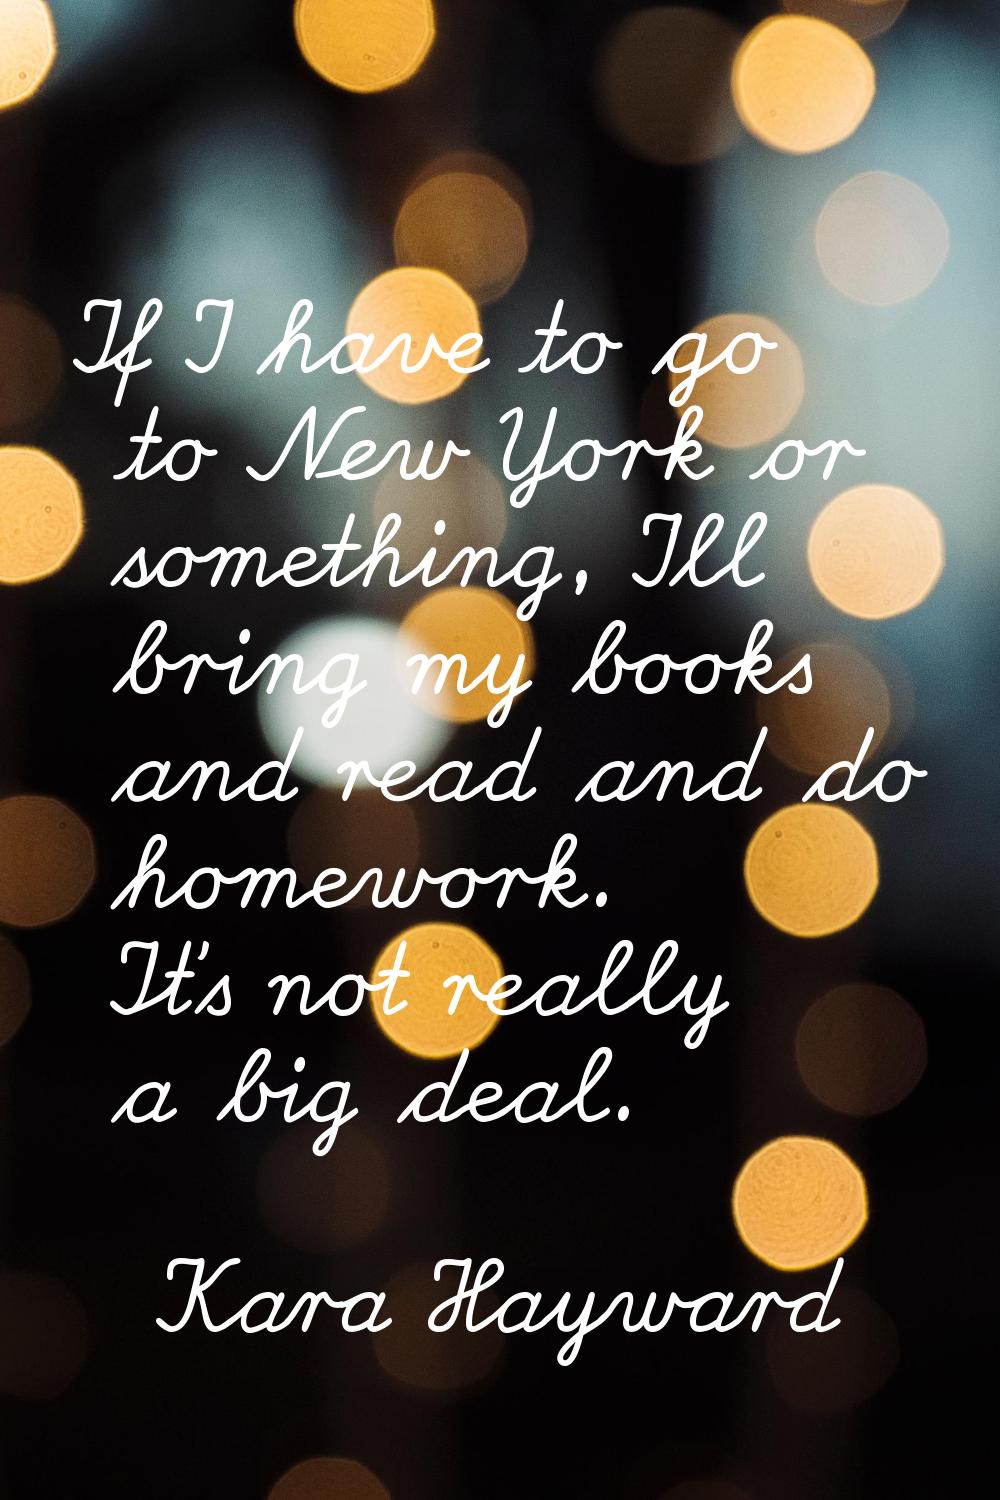 If I have to go to New York or something, I'll bring my books and read and do homework. It's not re